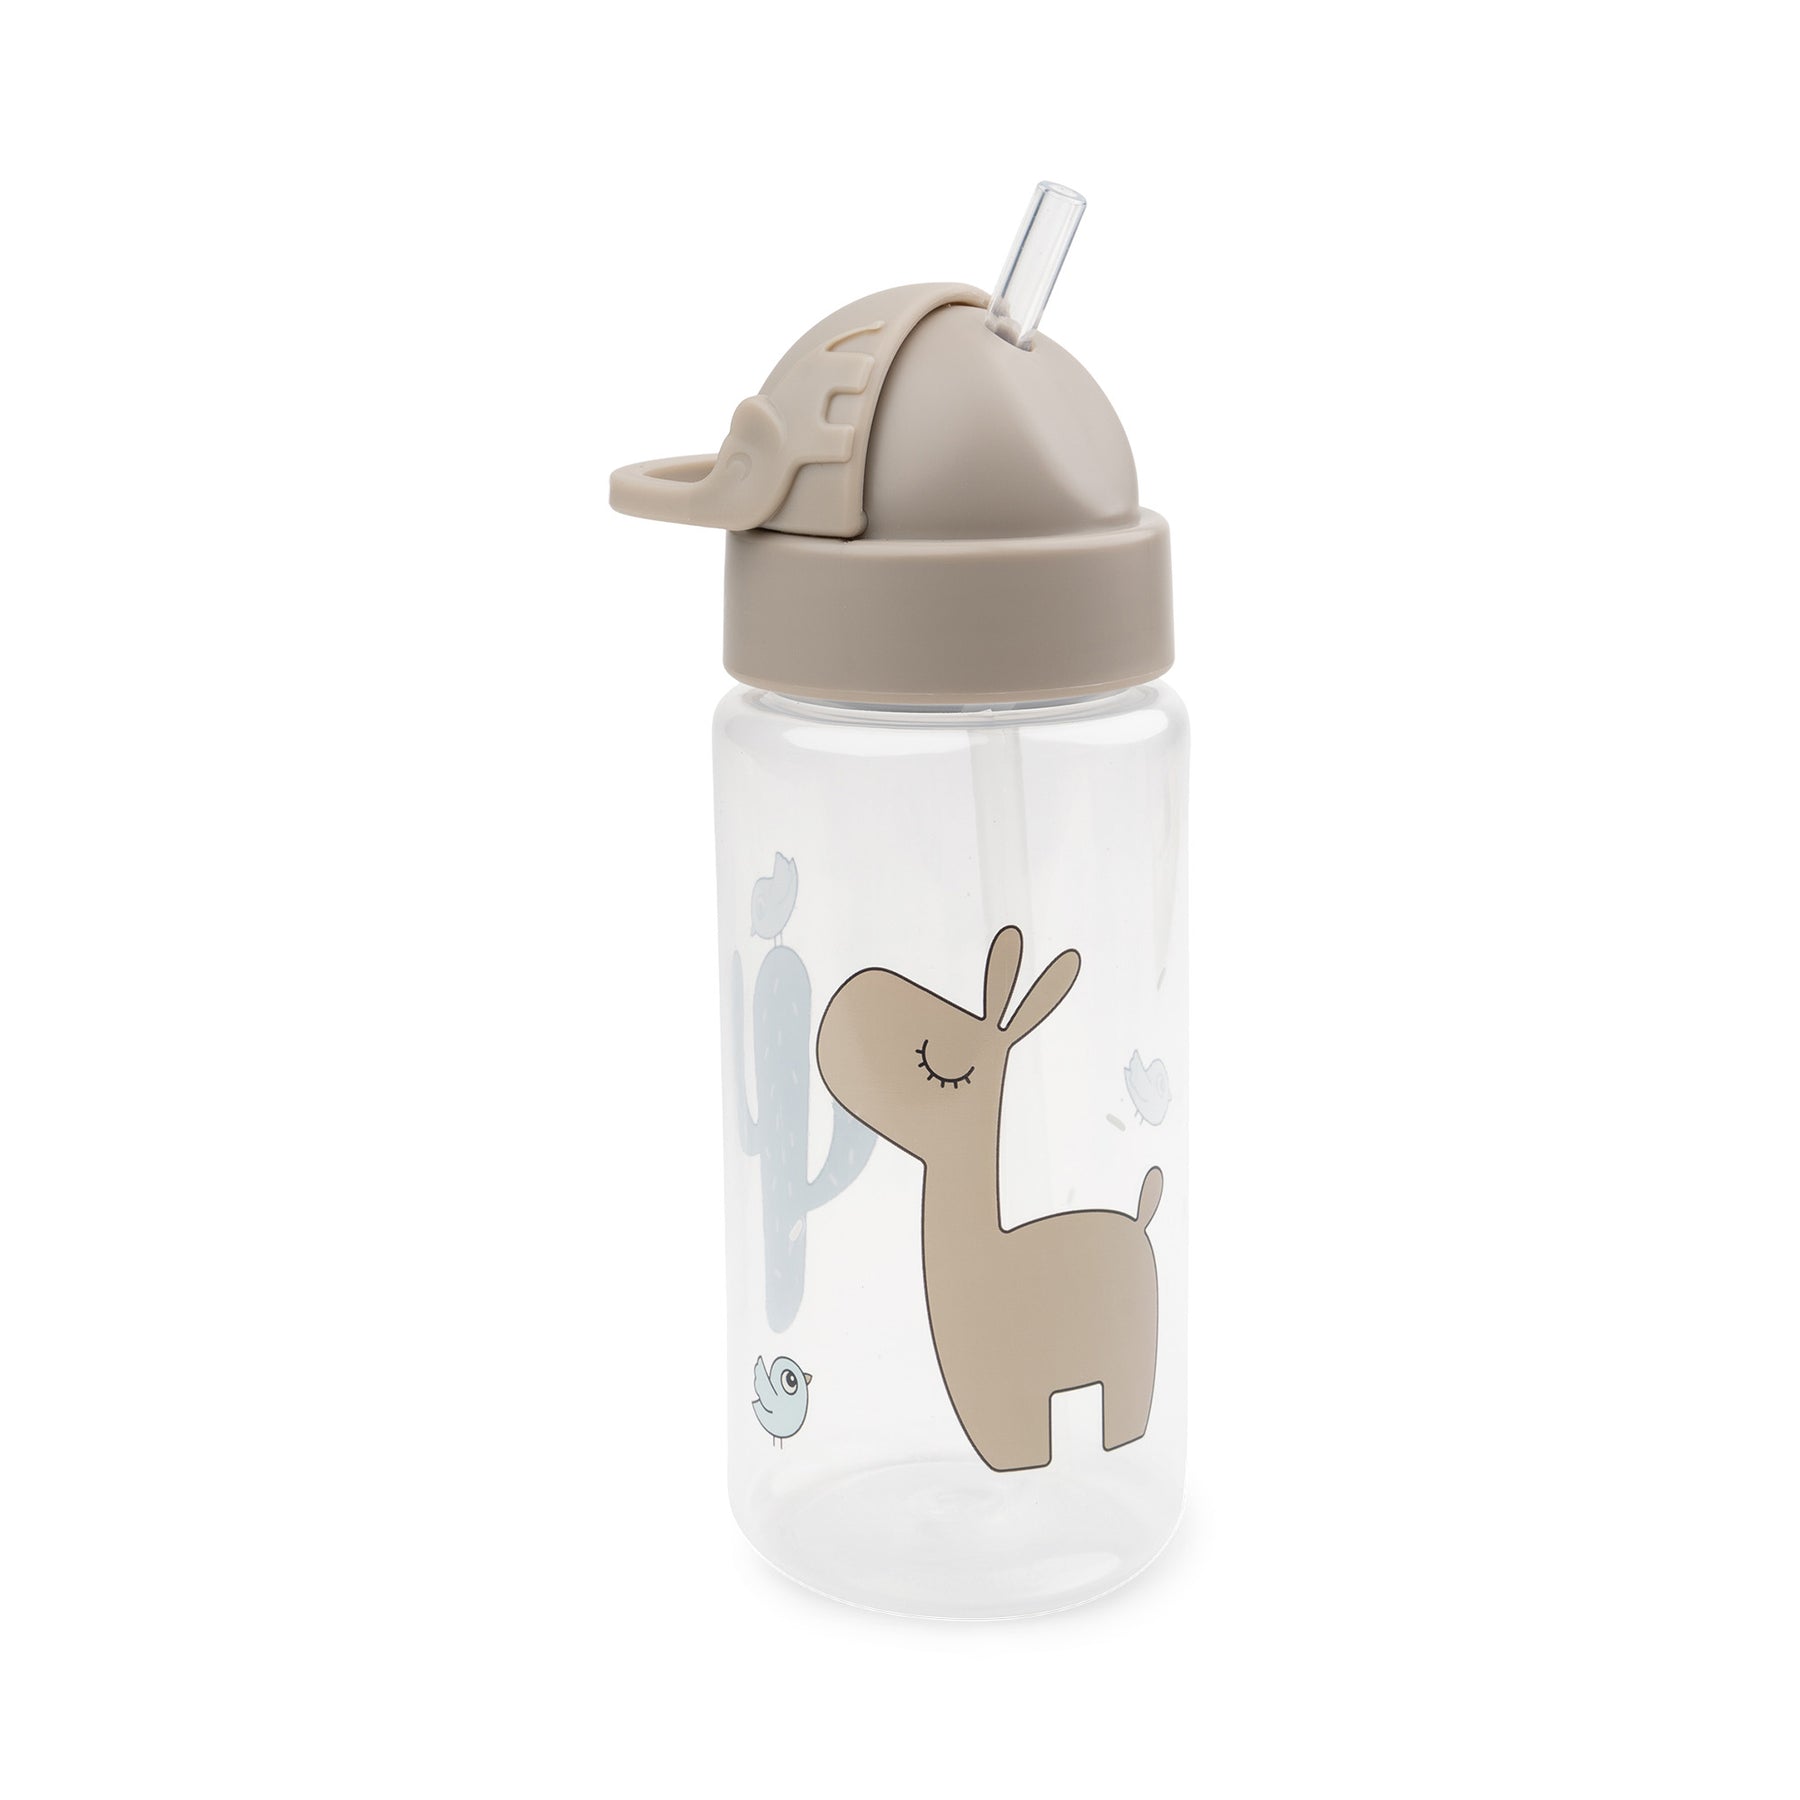 Straw bottle - Lalee - Sand - Front